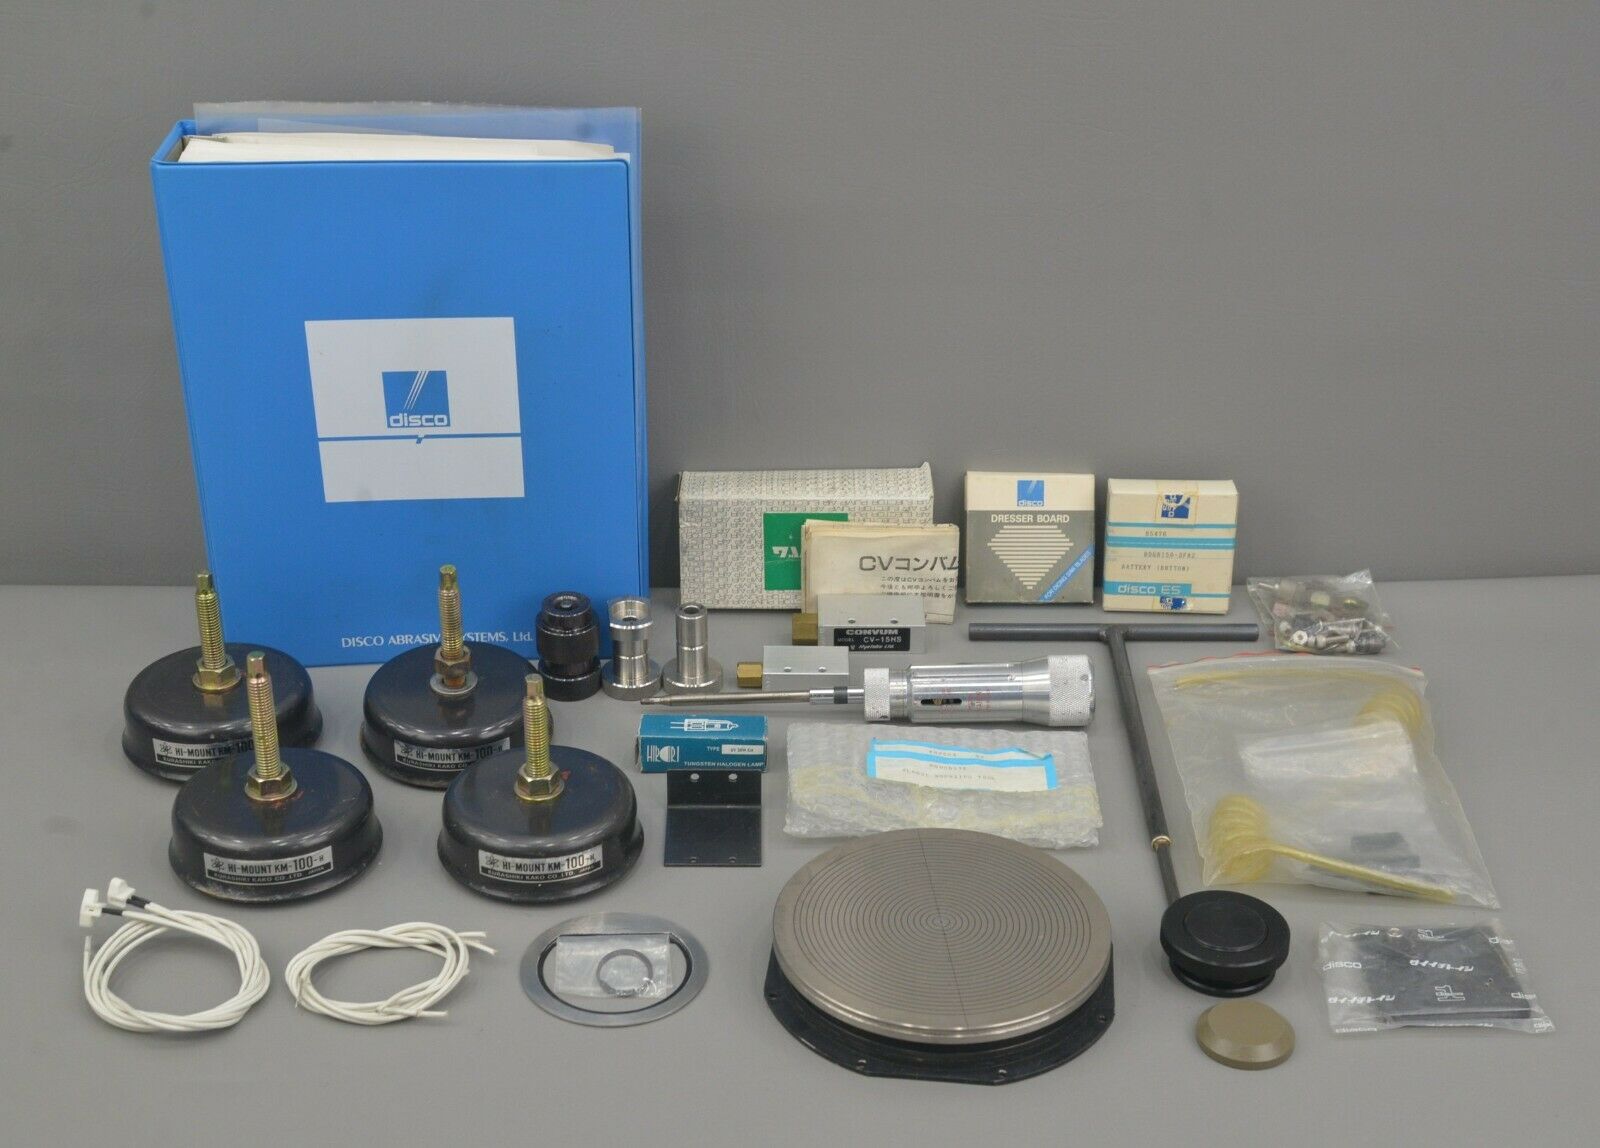 Dicing Equipment, Wafer Saw, Wafer Mount and Wash